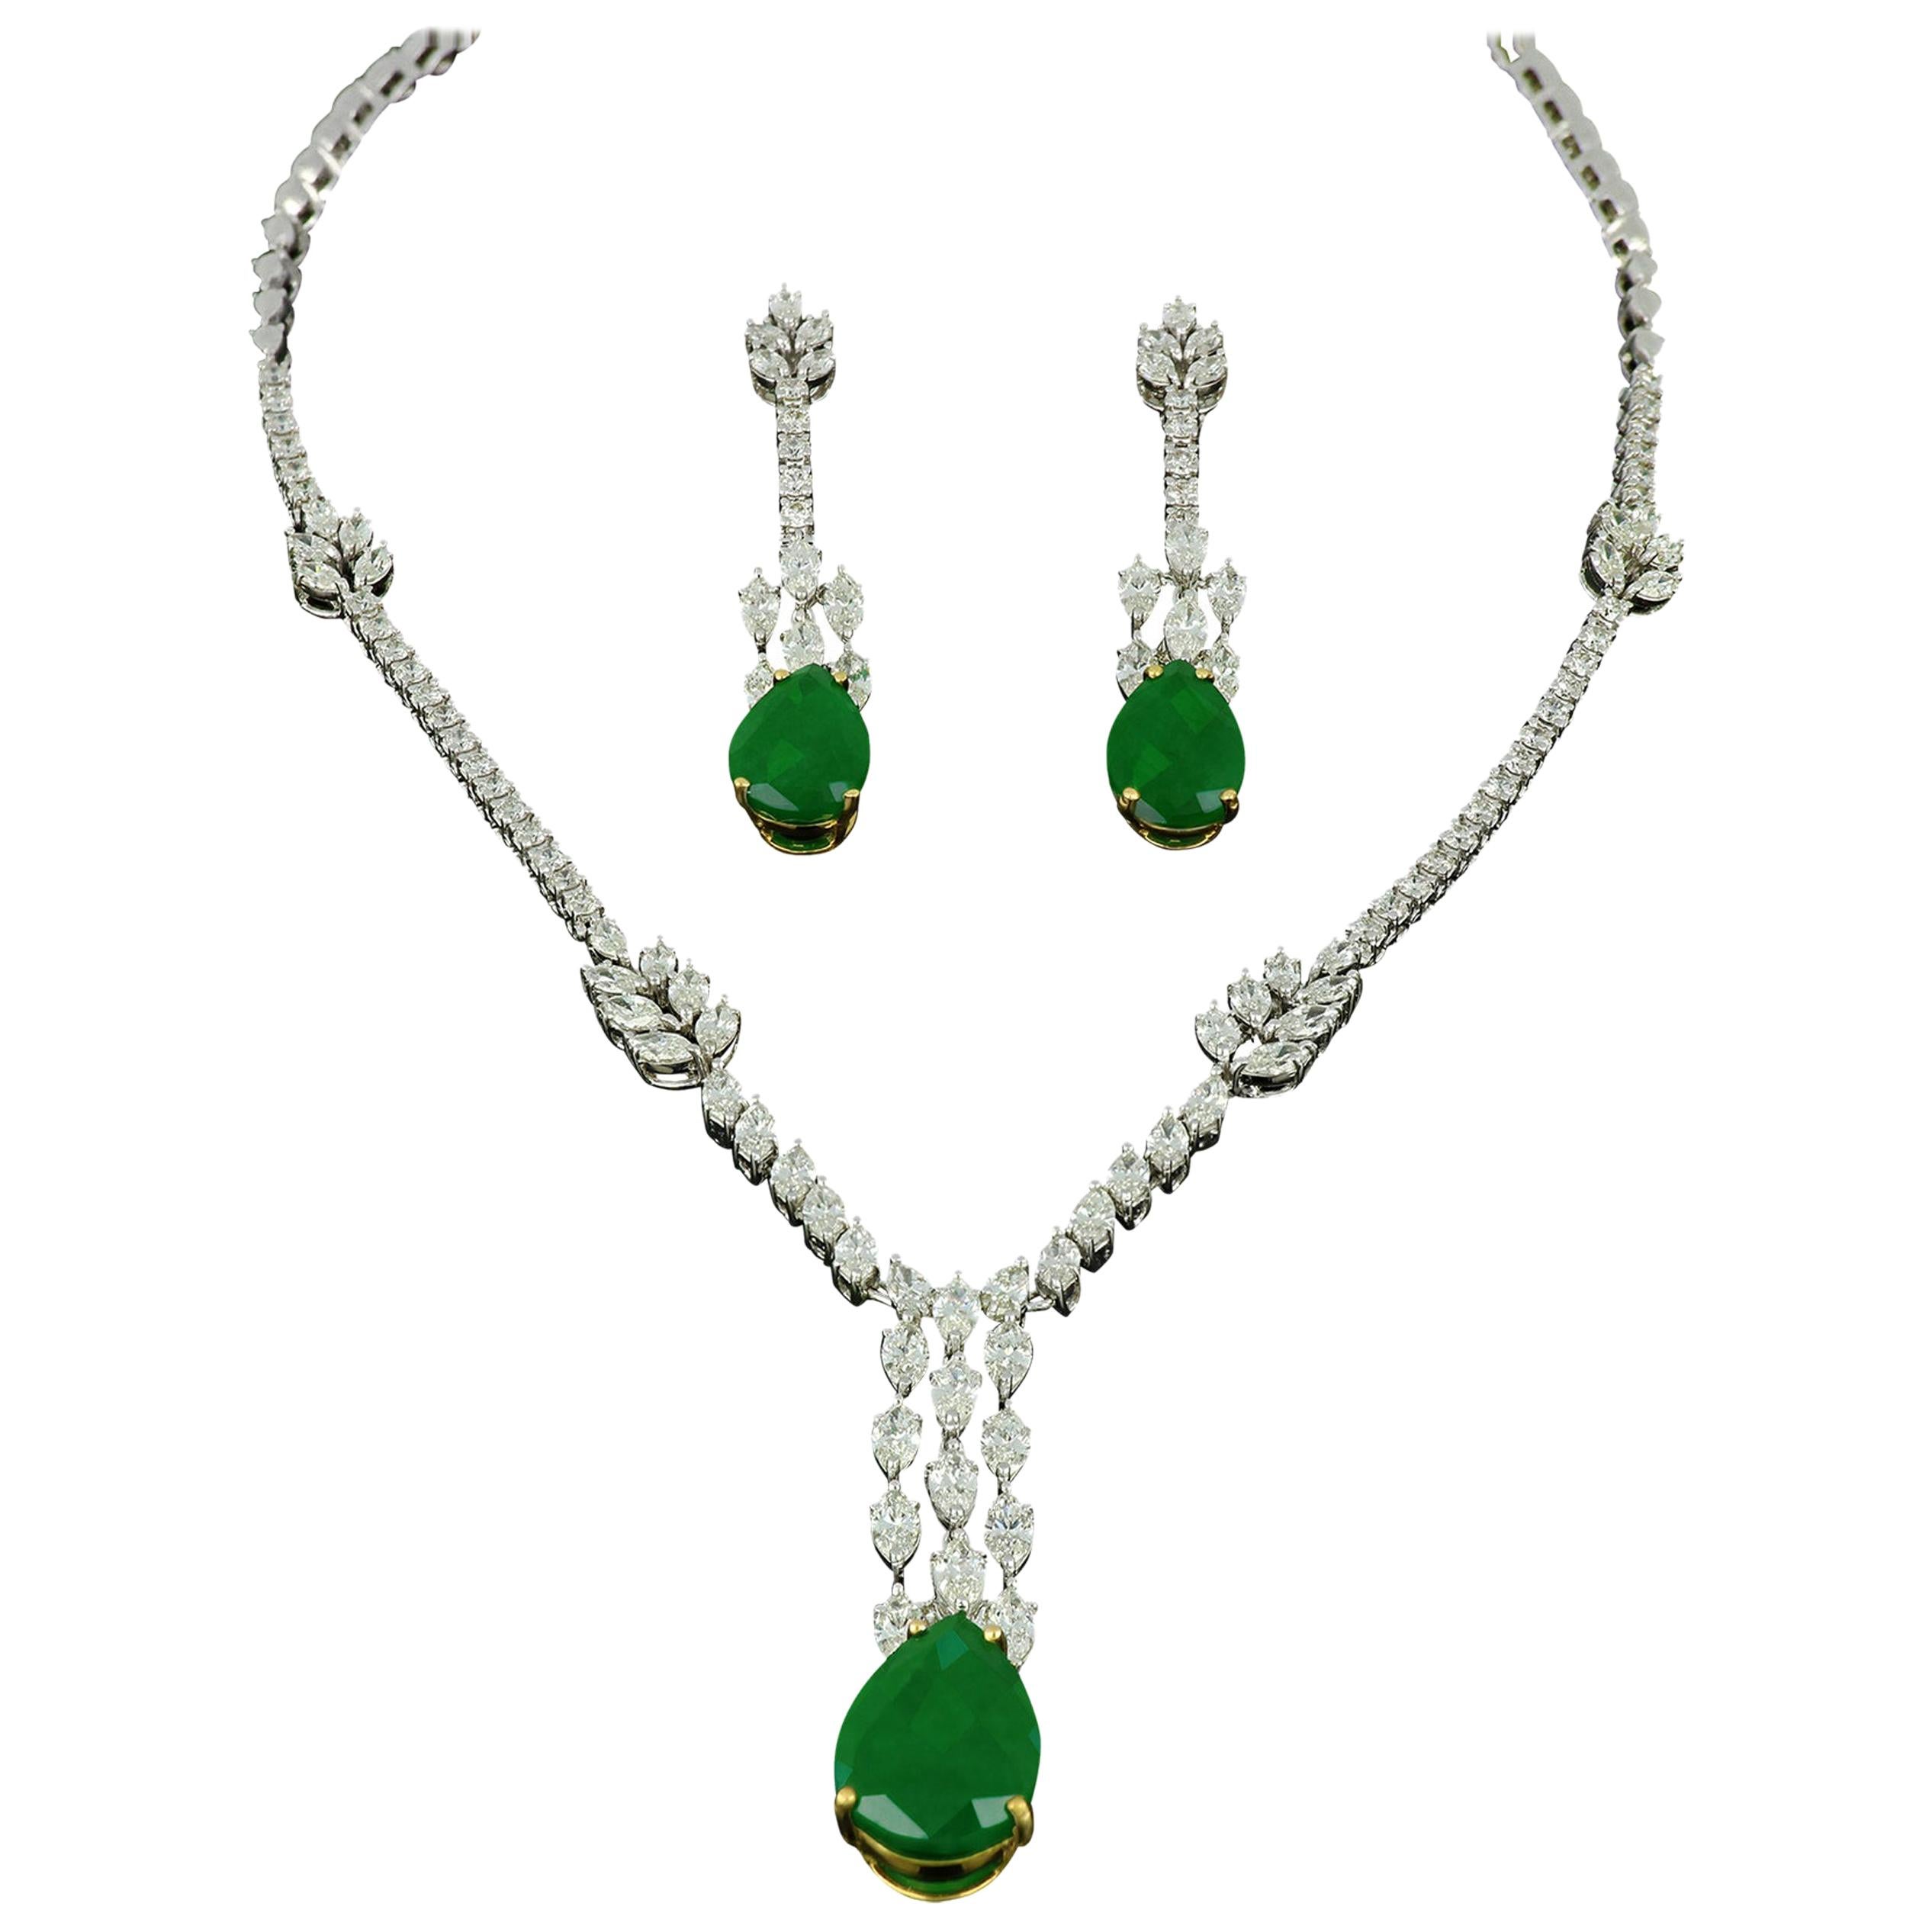 Amwaj White Gold 18 Karat Necklace and Earrings with Diamonds and Emeralds